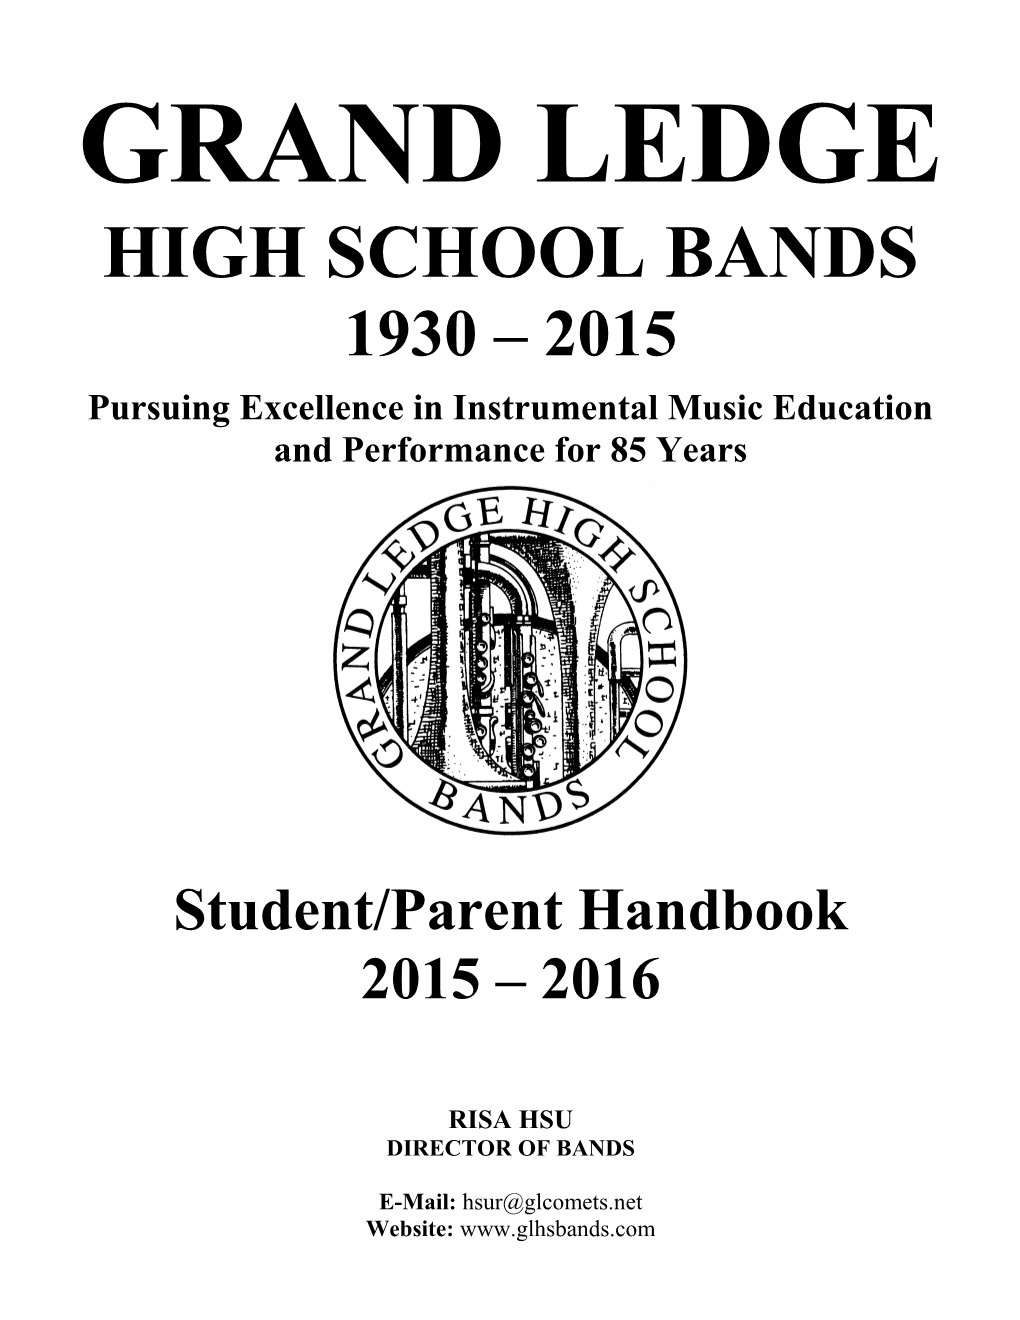 Pursuing Excellence in Instrumental Music Education and Performance for 85 Years